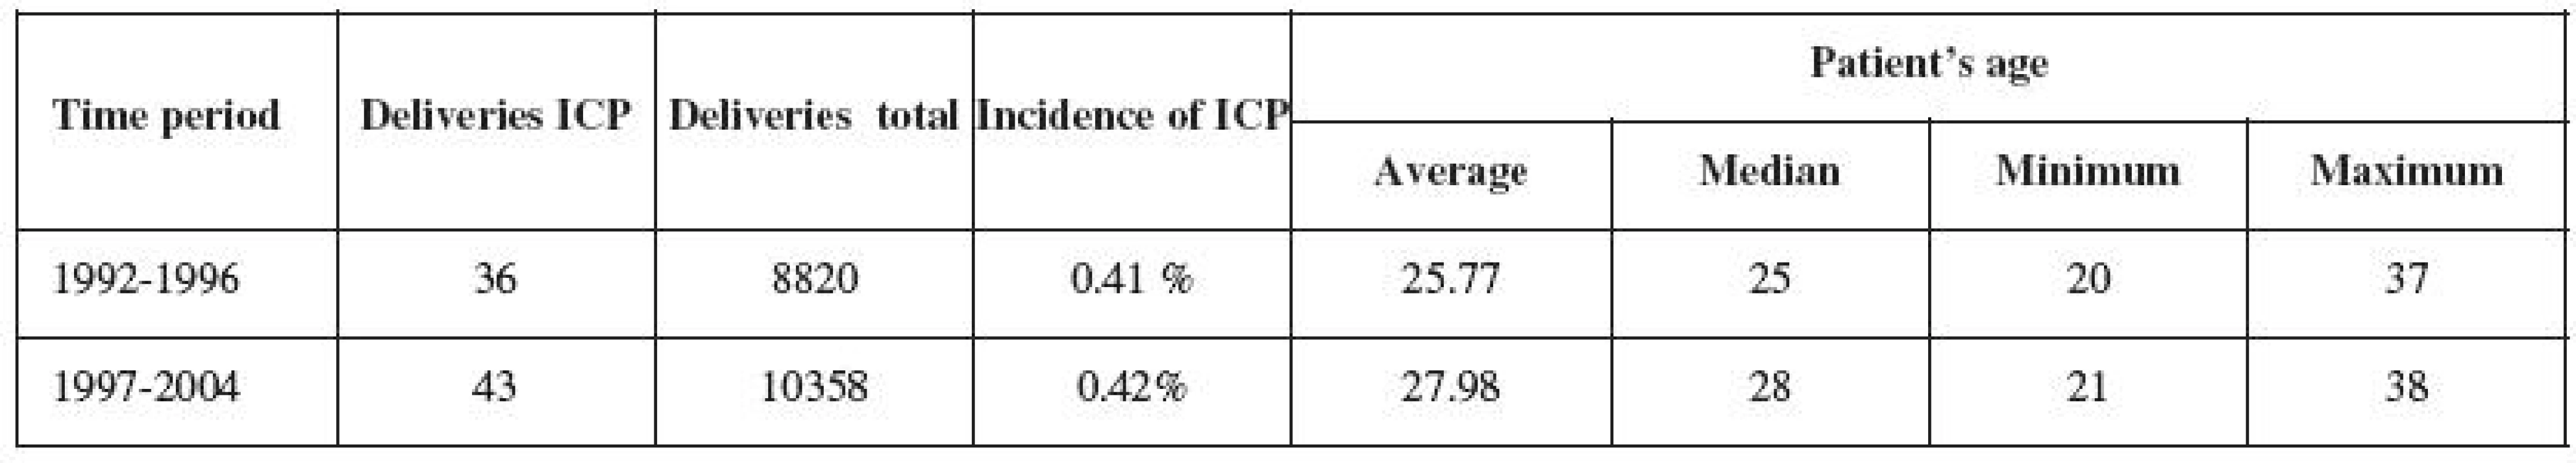 Characteristics of the population with ICP